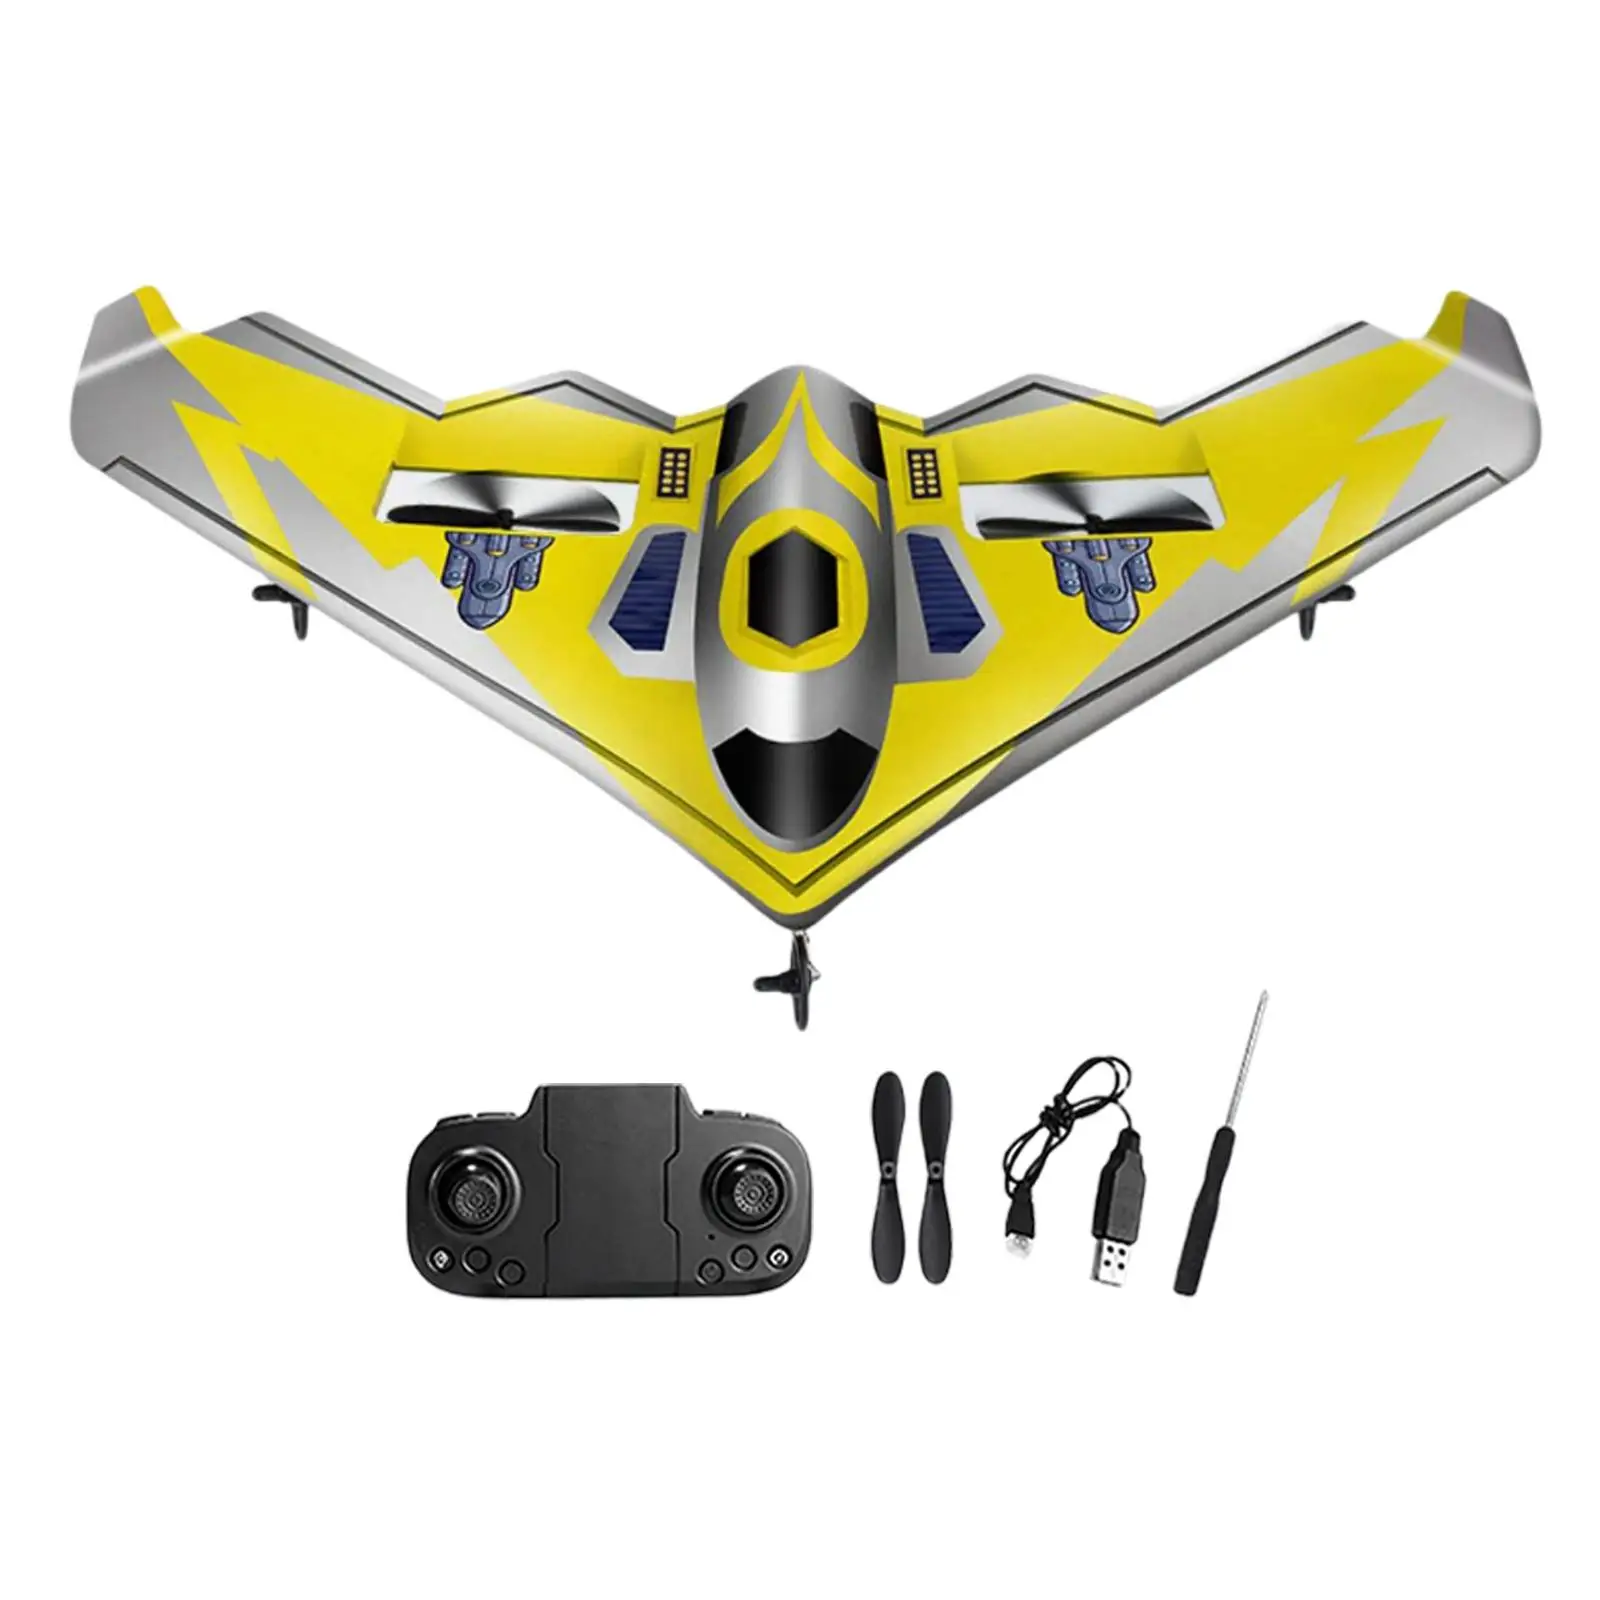 2.4G Remote Control Airplane Outdoor Drone Toys Aircraft RC Glider for Kids